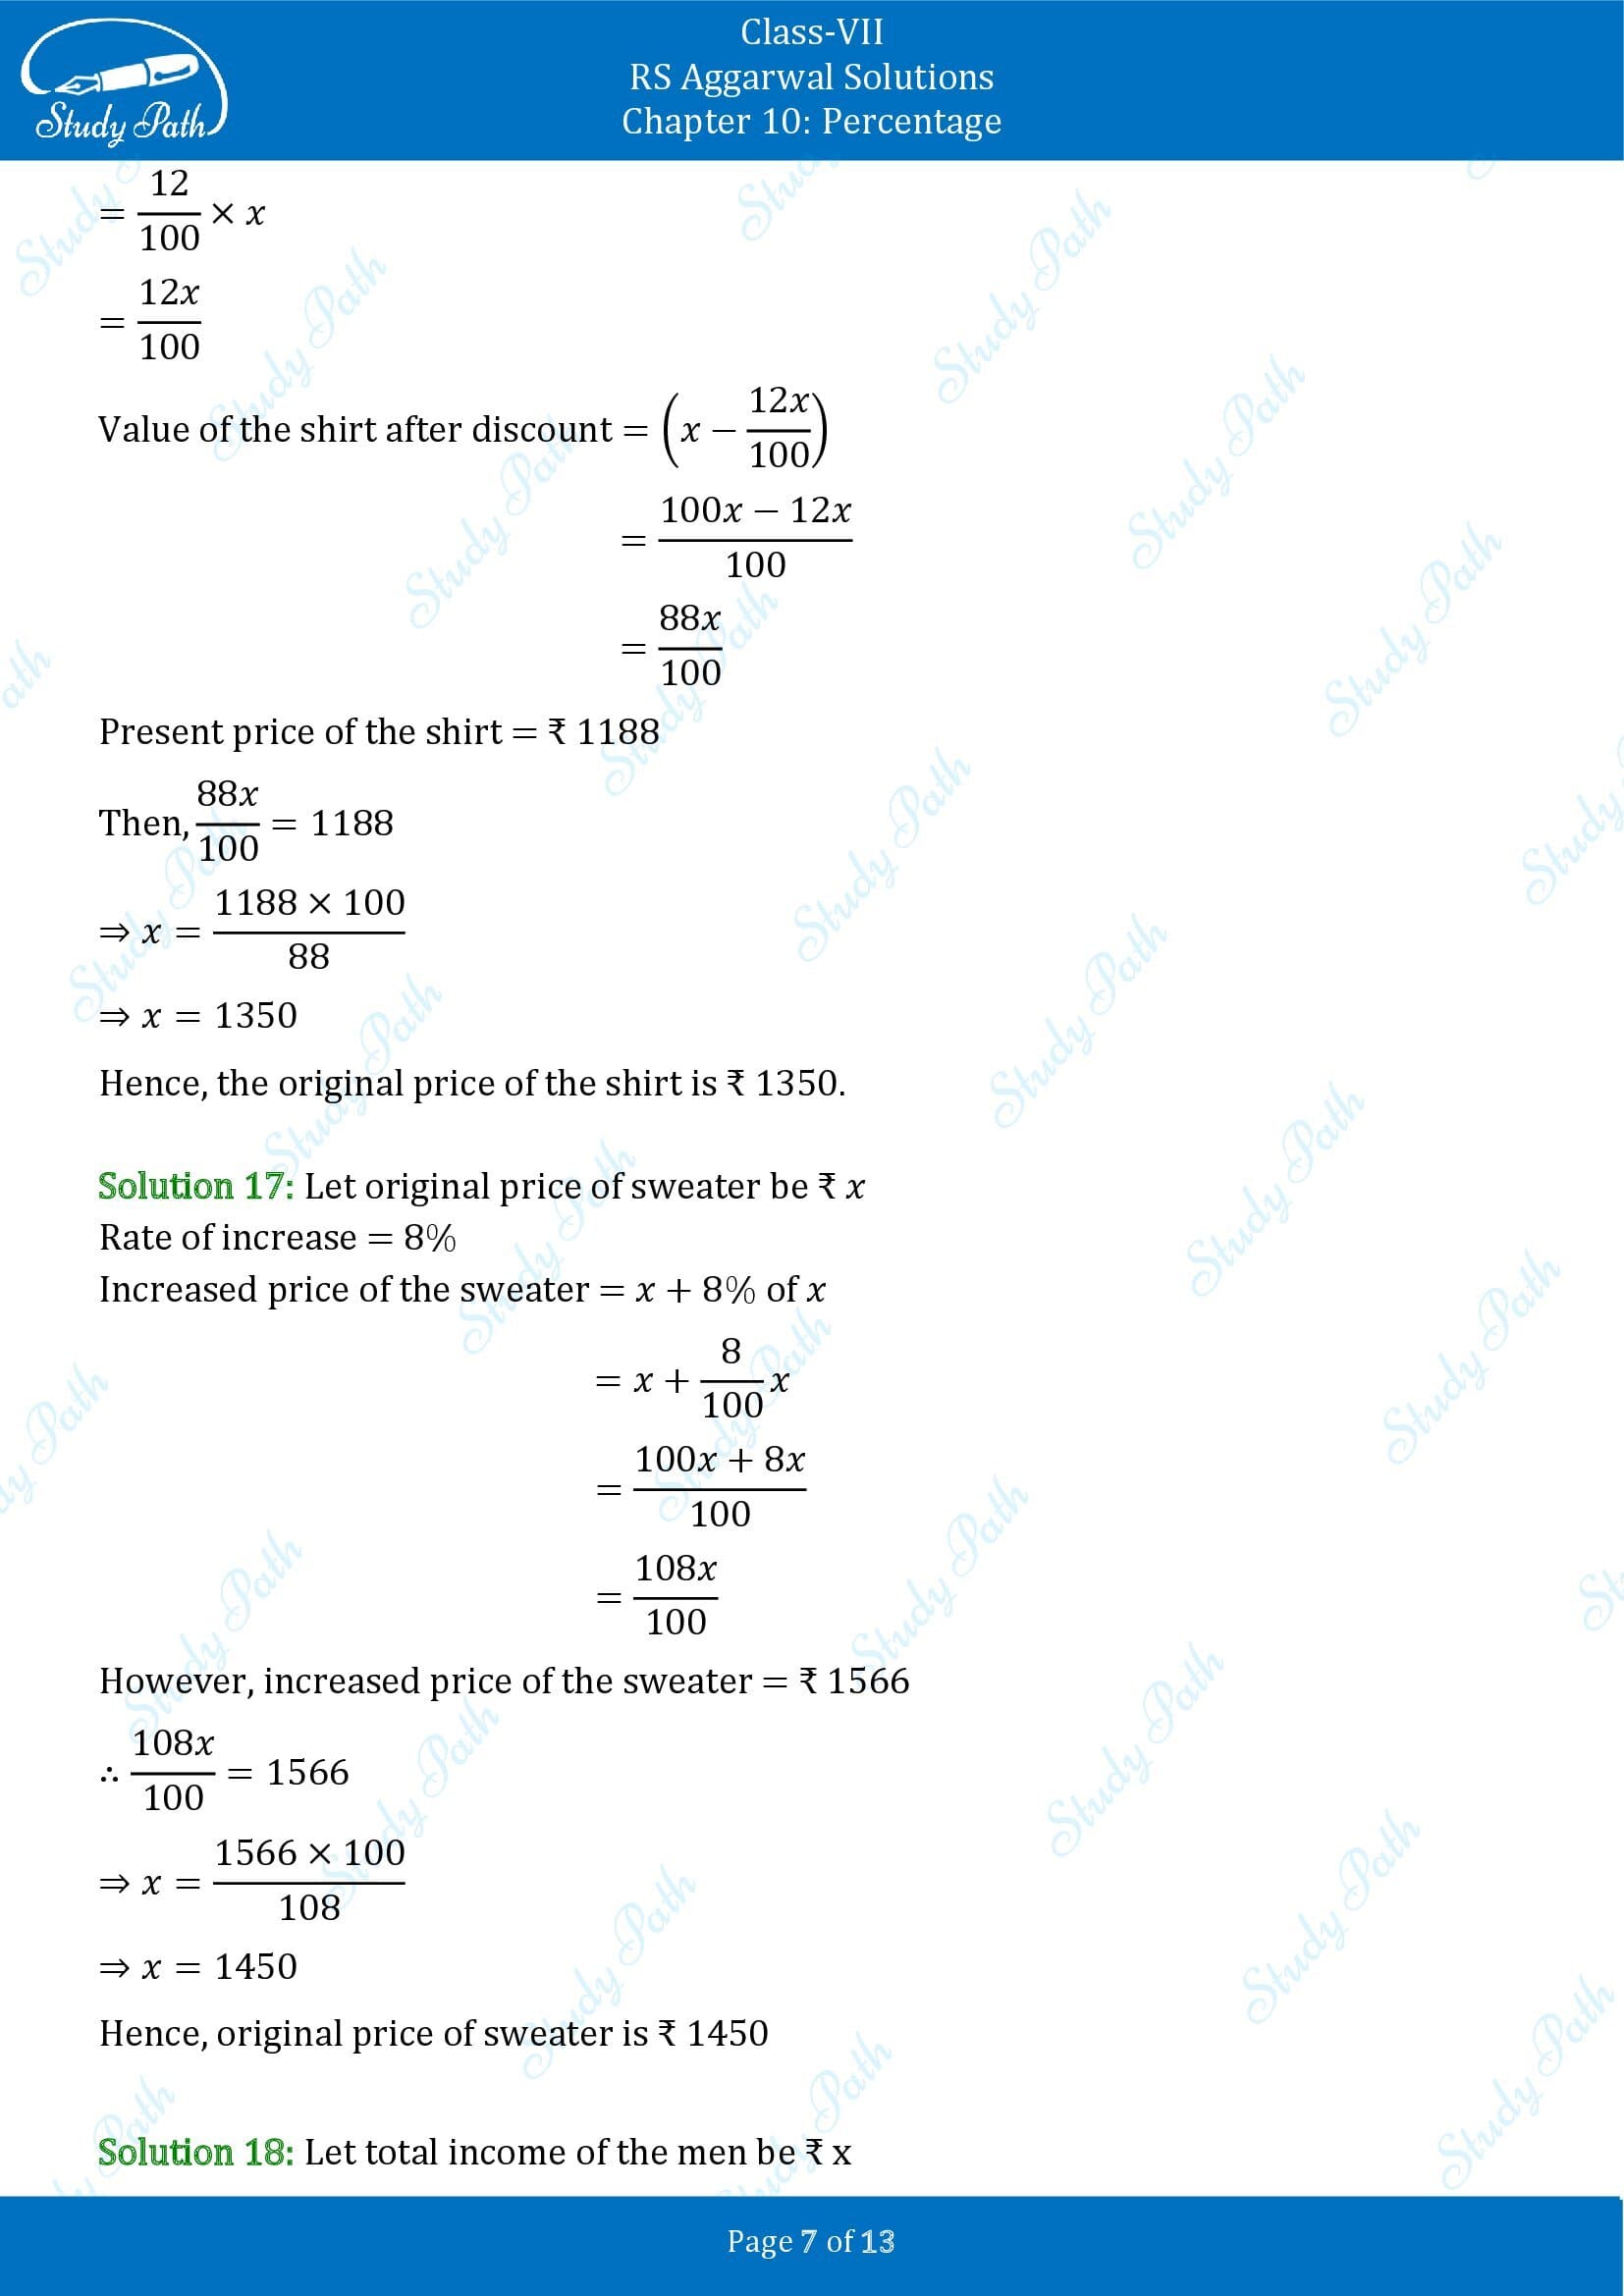 RS Aggarwal Solutions Class 7 Chapter 10 Percentage Exercise 10B 00007